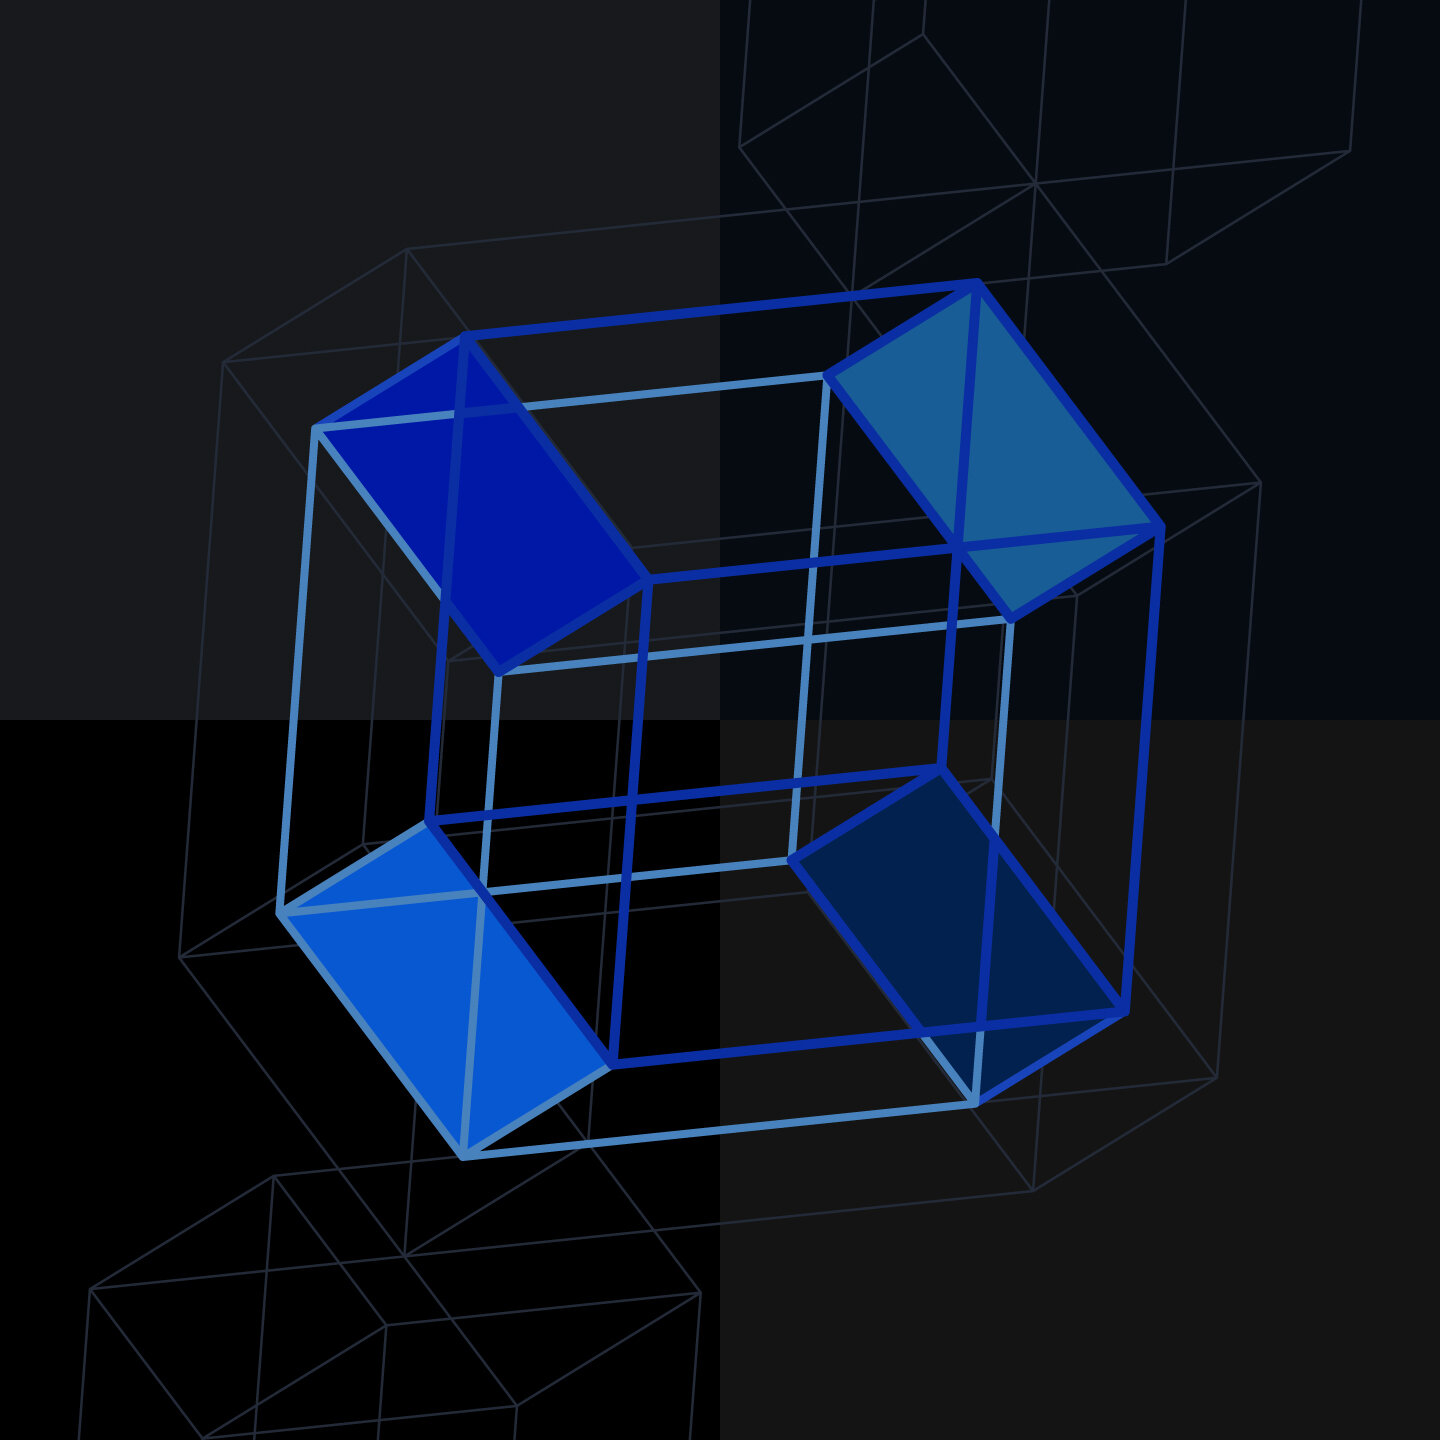 20200517_hypercube-spaces_1-big-cube_2-small-cubes_in-4d_4-4-fields_center-2.jpg